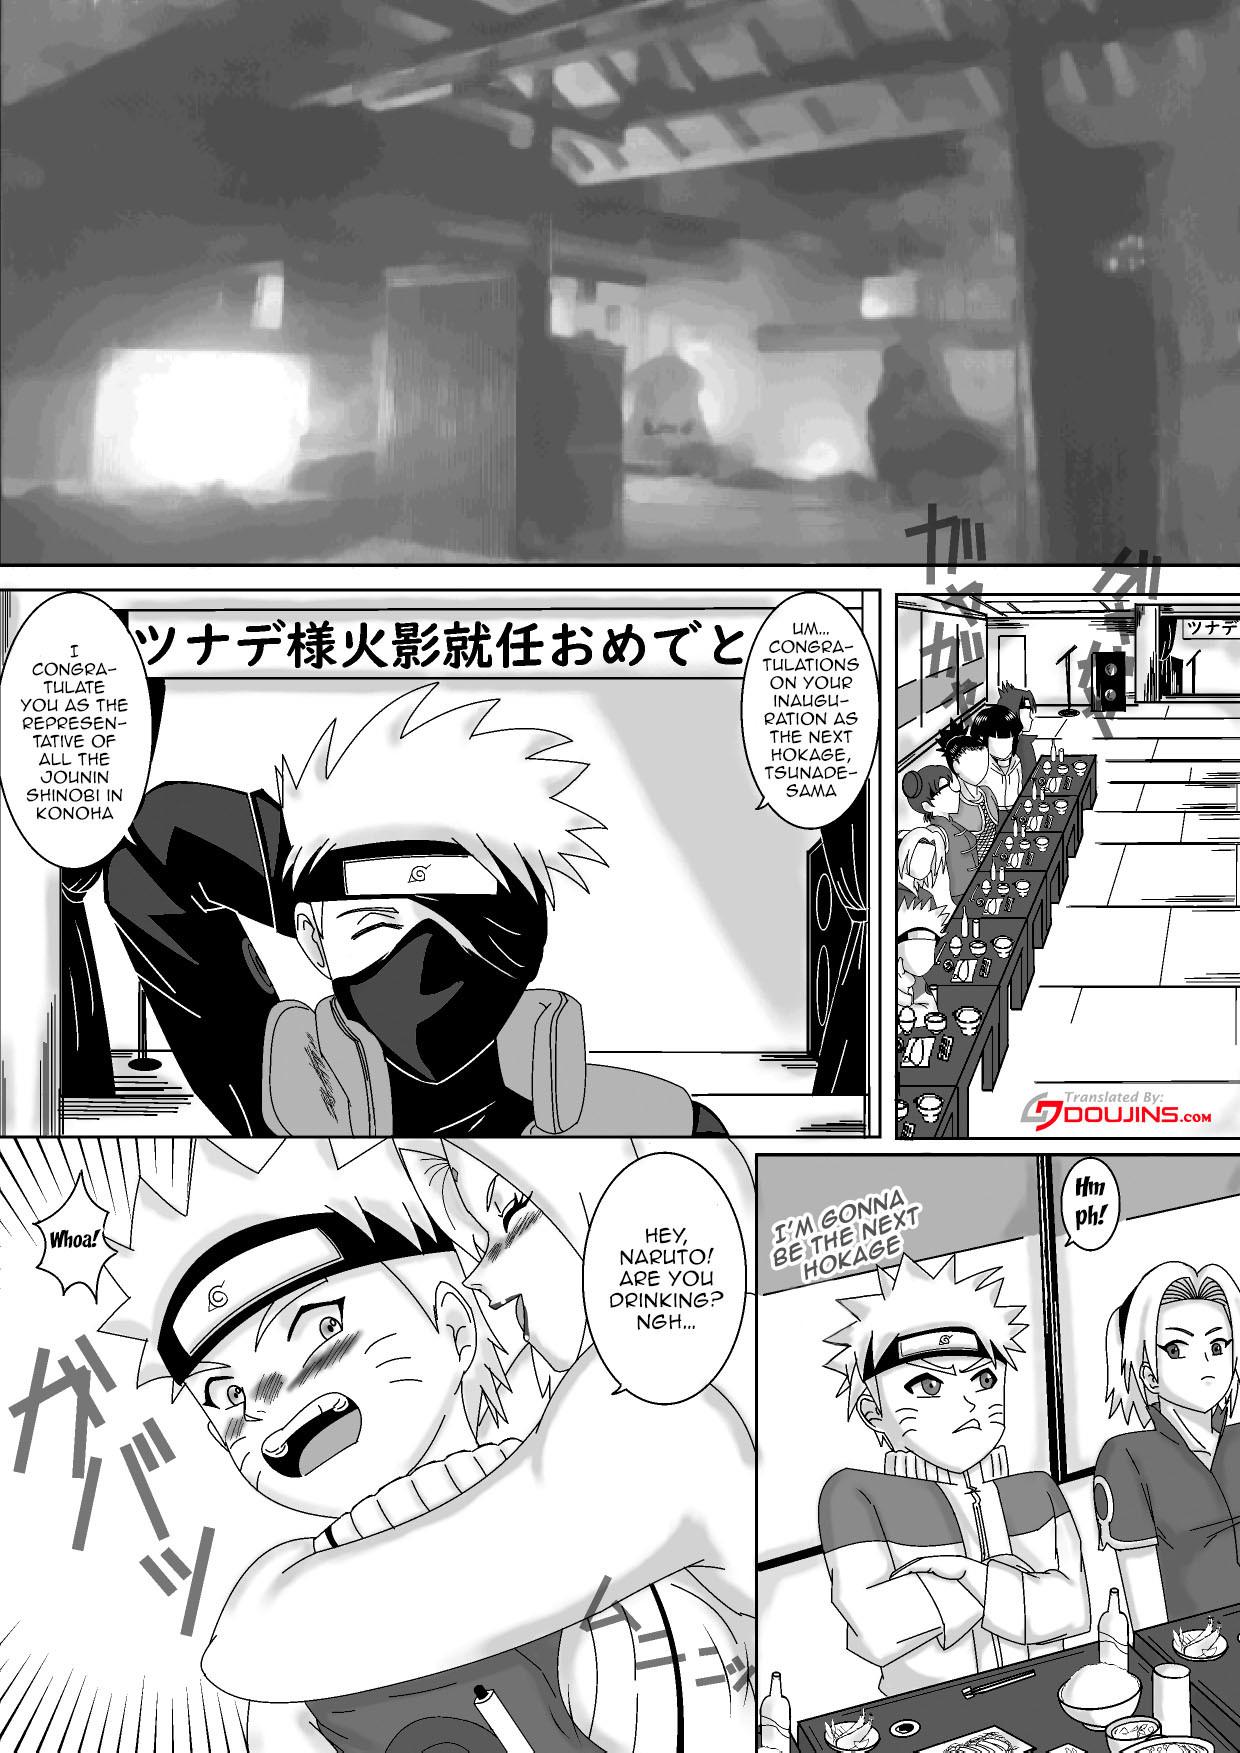 Dando Nomisugite Deisui Shita BBA to Yarimakutta Ken!! | The Case Of Having Sex With This Old Lady After She Got Herself Really Drunk - Naruto Threeway - Page 2